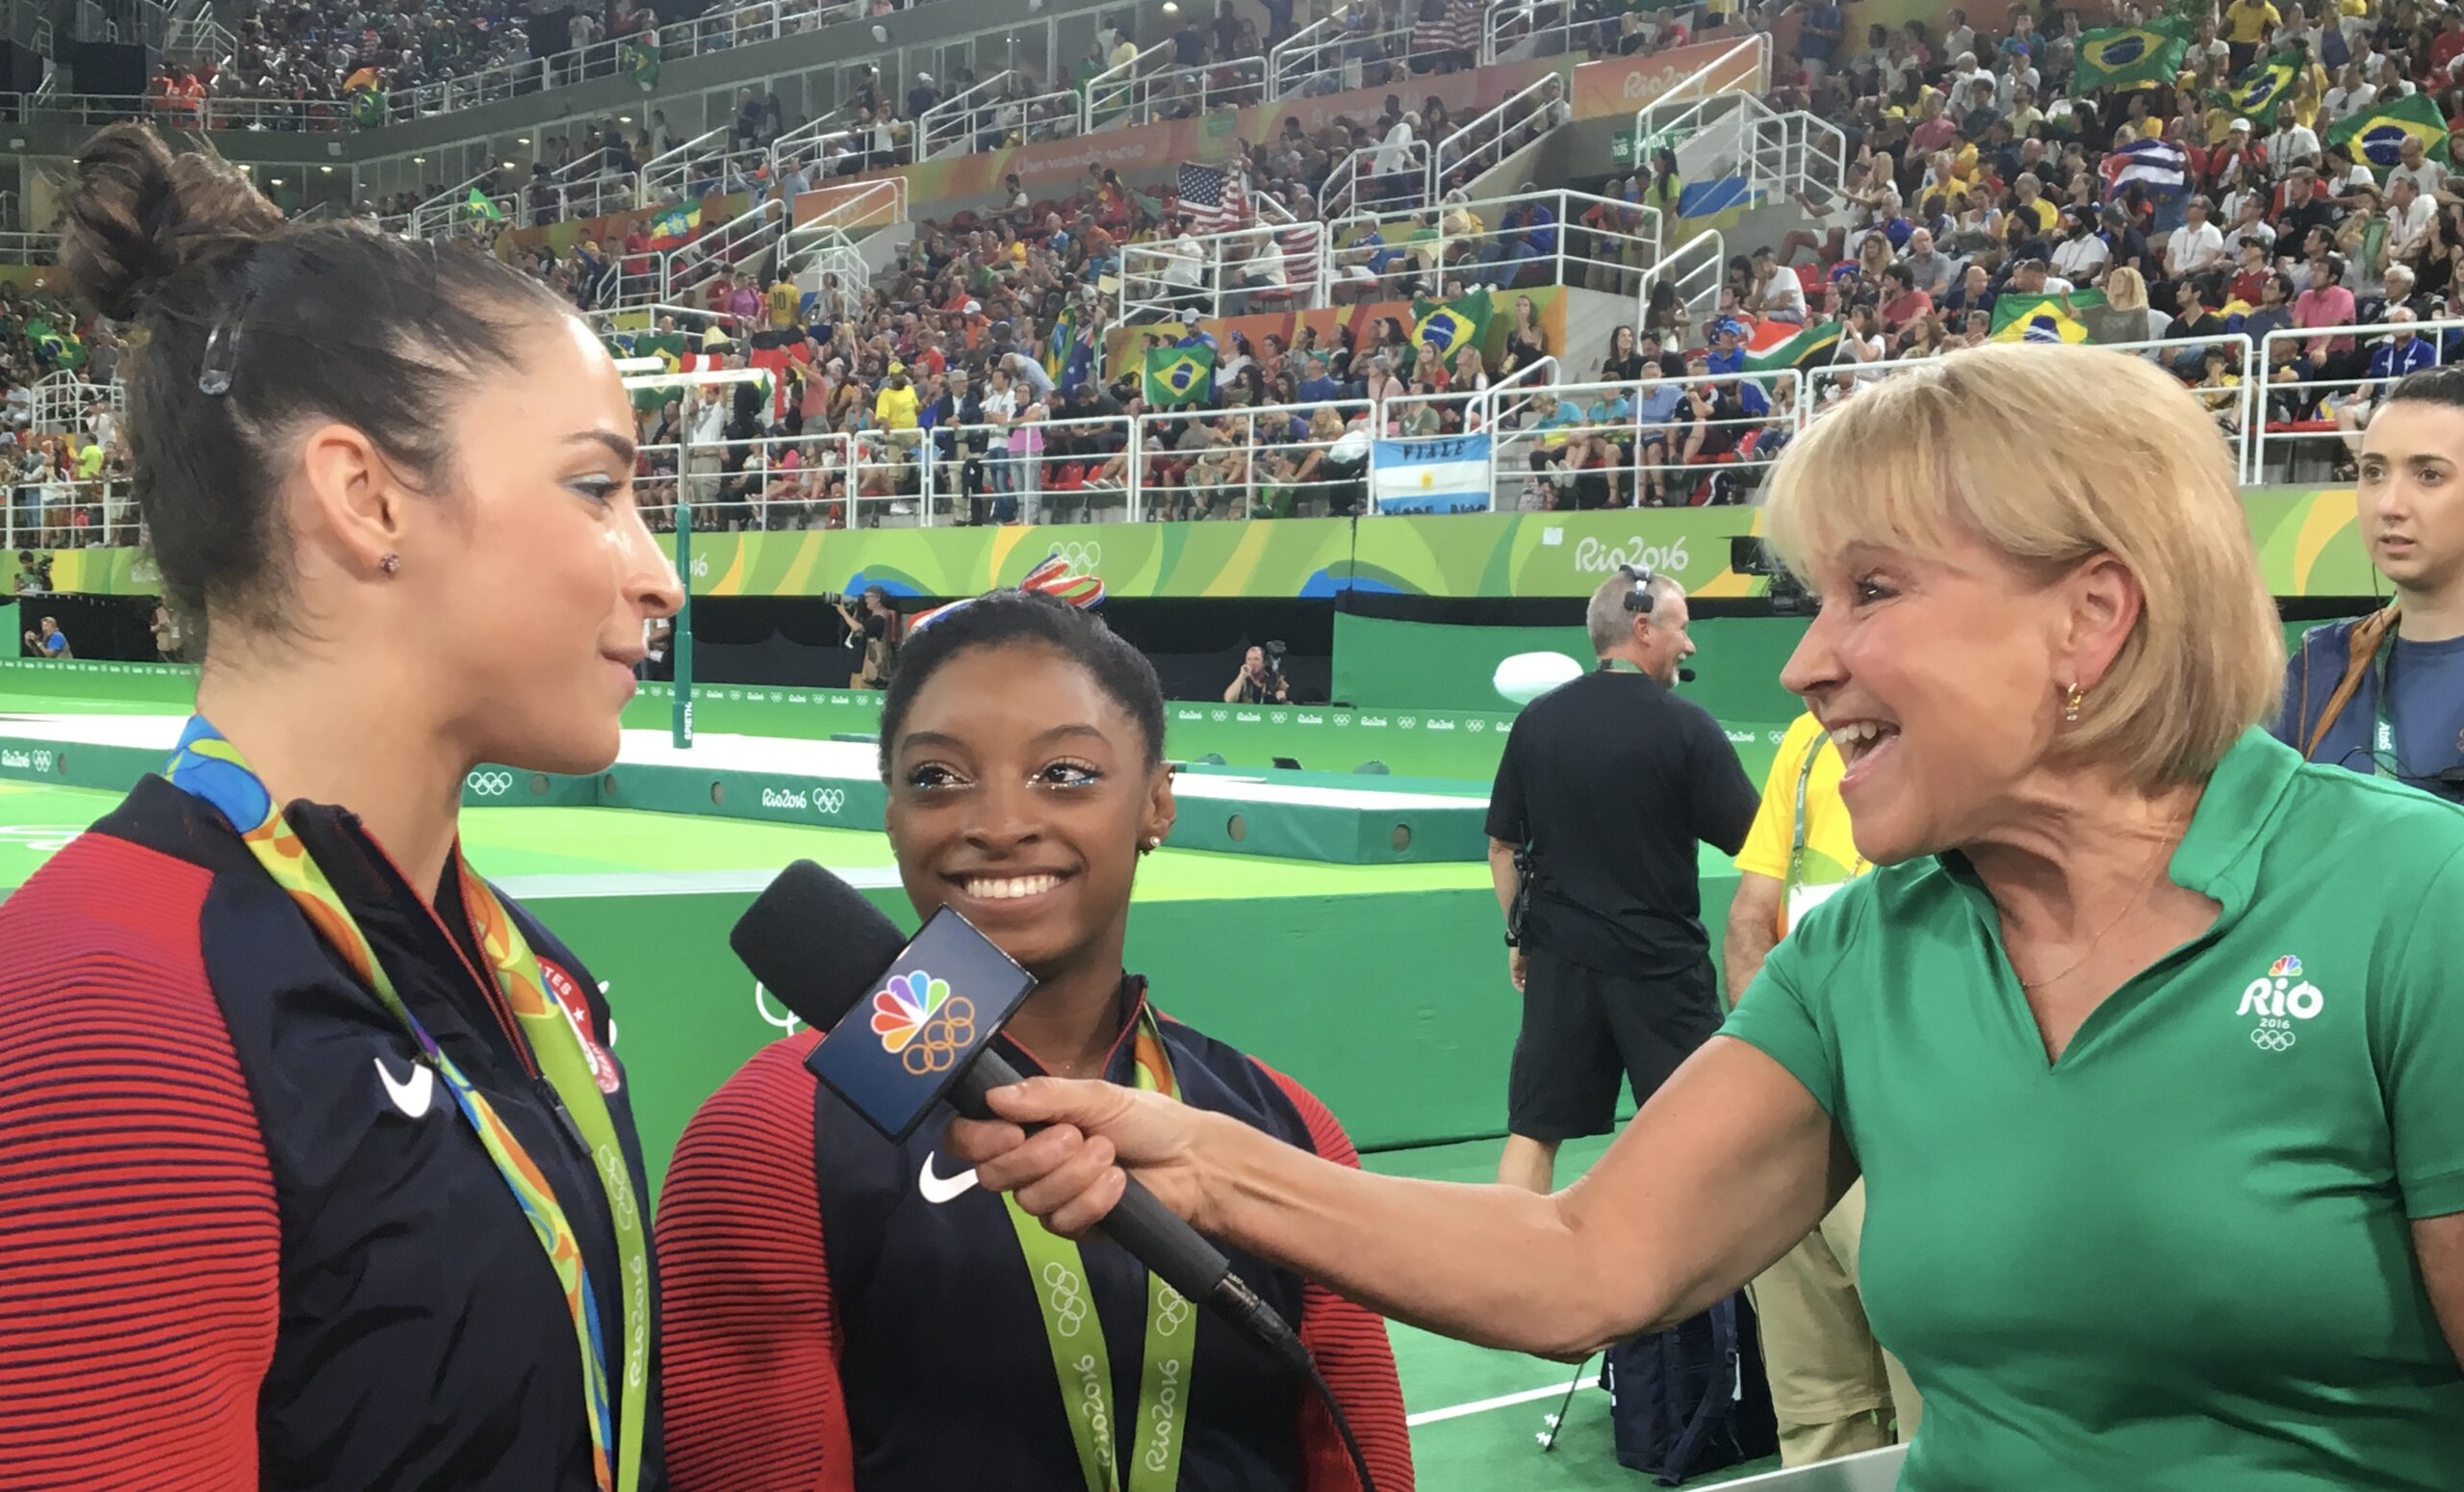 Joyce, far right, in a green Rio Olympics polo shirt, holds a microphone to Aly Raisman, far left, who is in a USA top and wears a medal around her neck. Simone Biles, in the same outfit, stands in the middle smiling at Raisman.